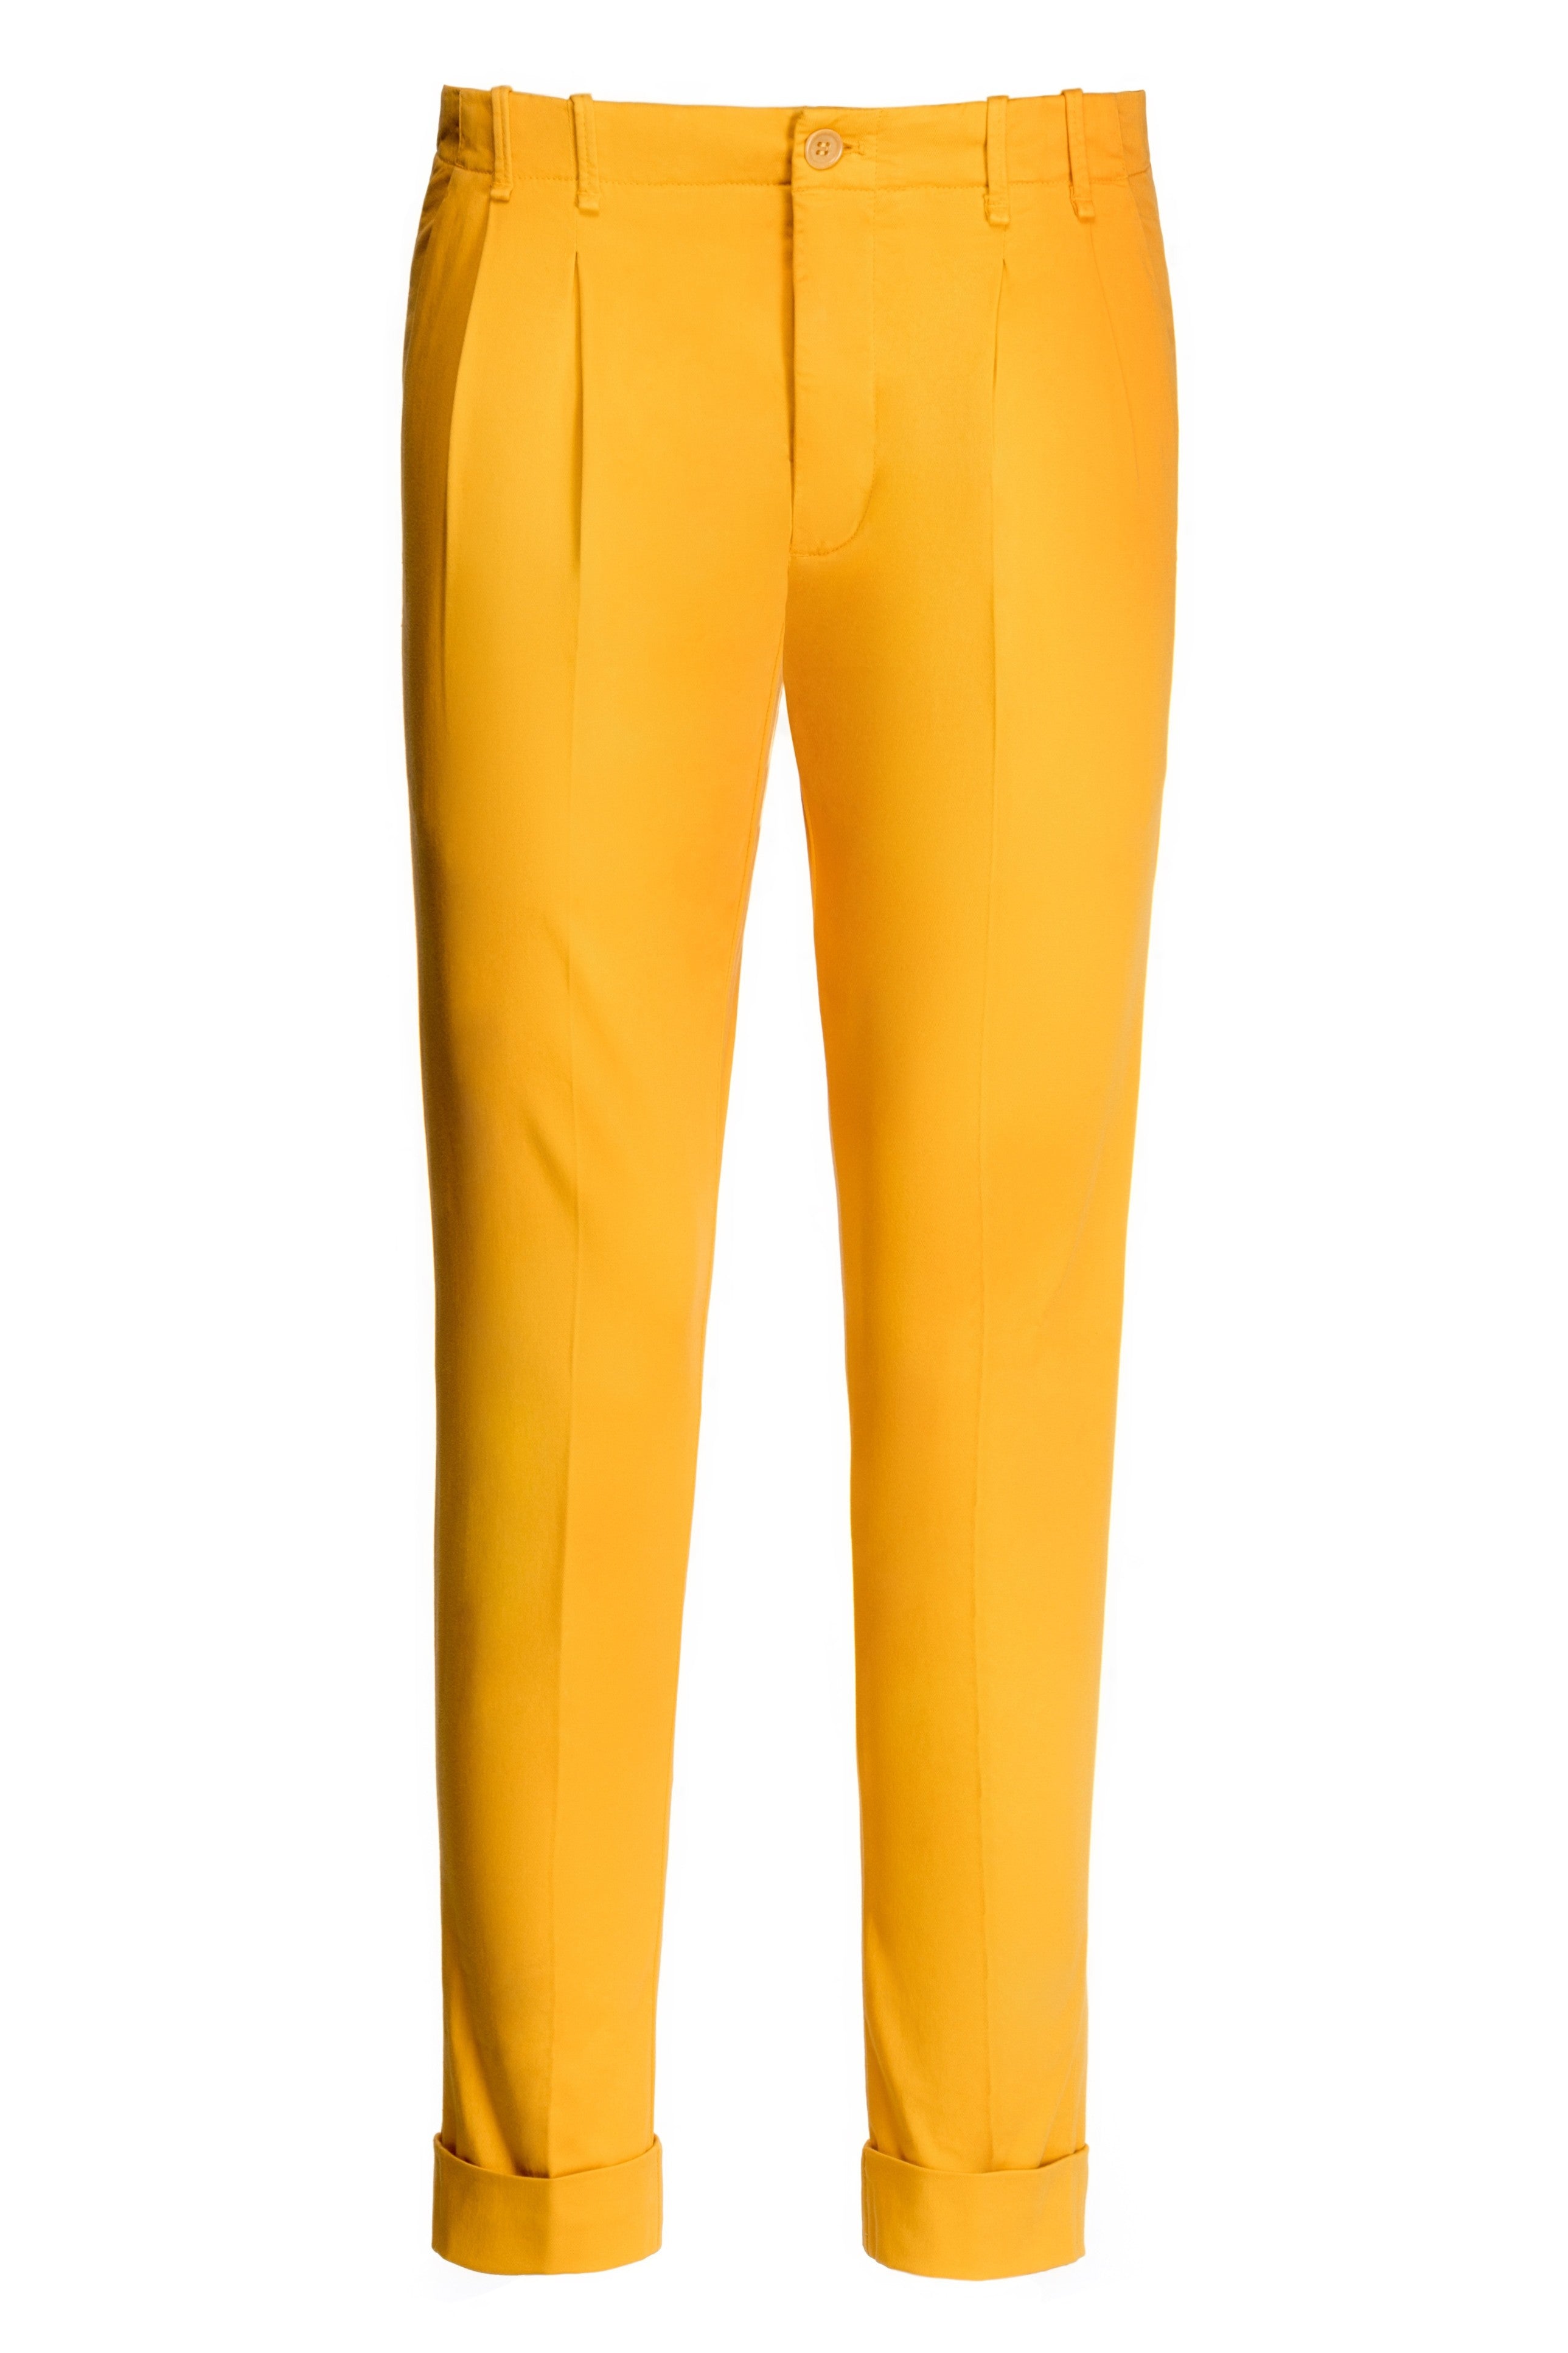 Yellow Pants With Pleats